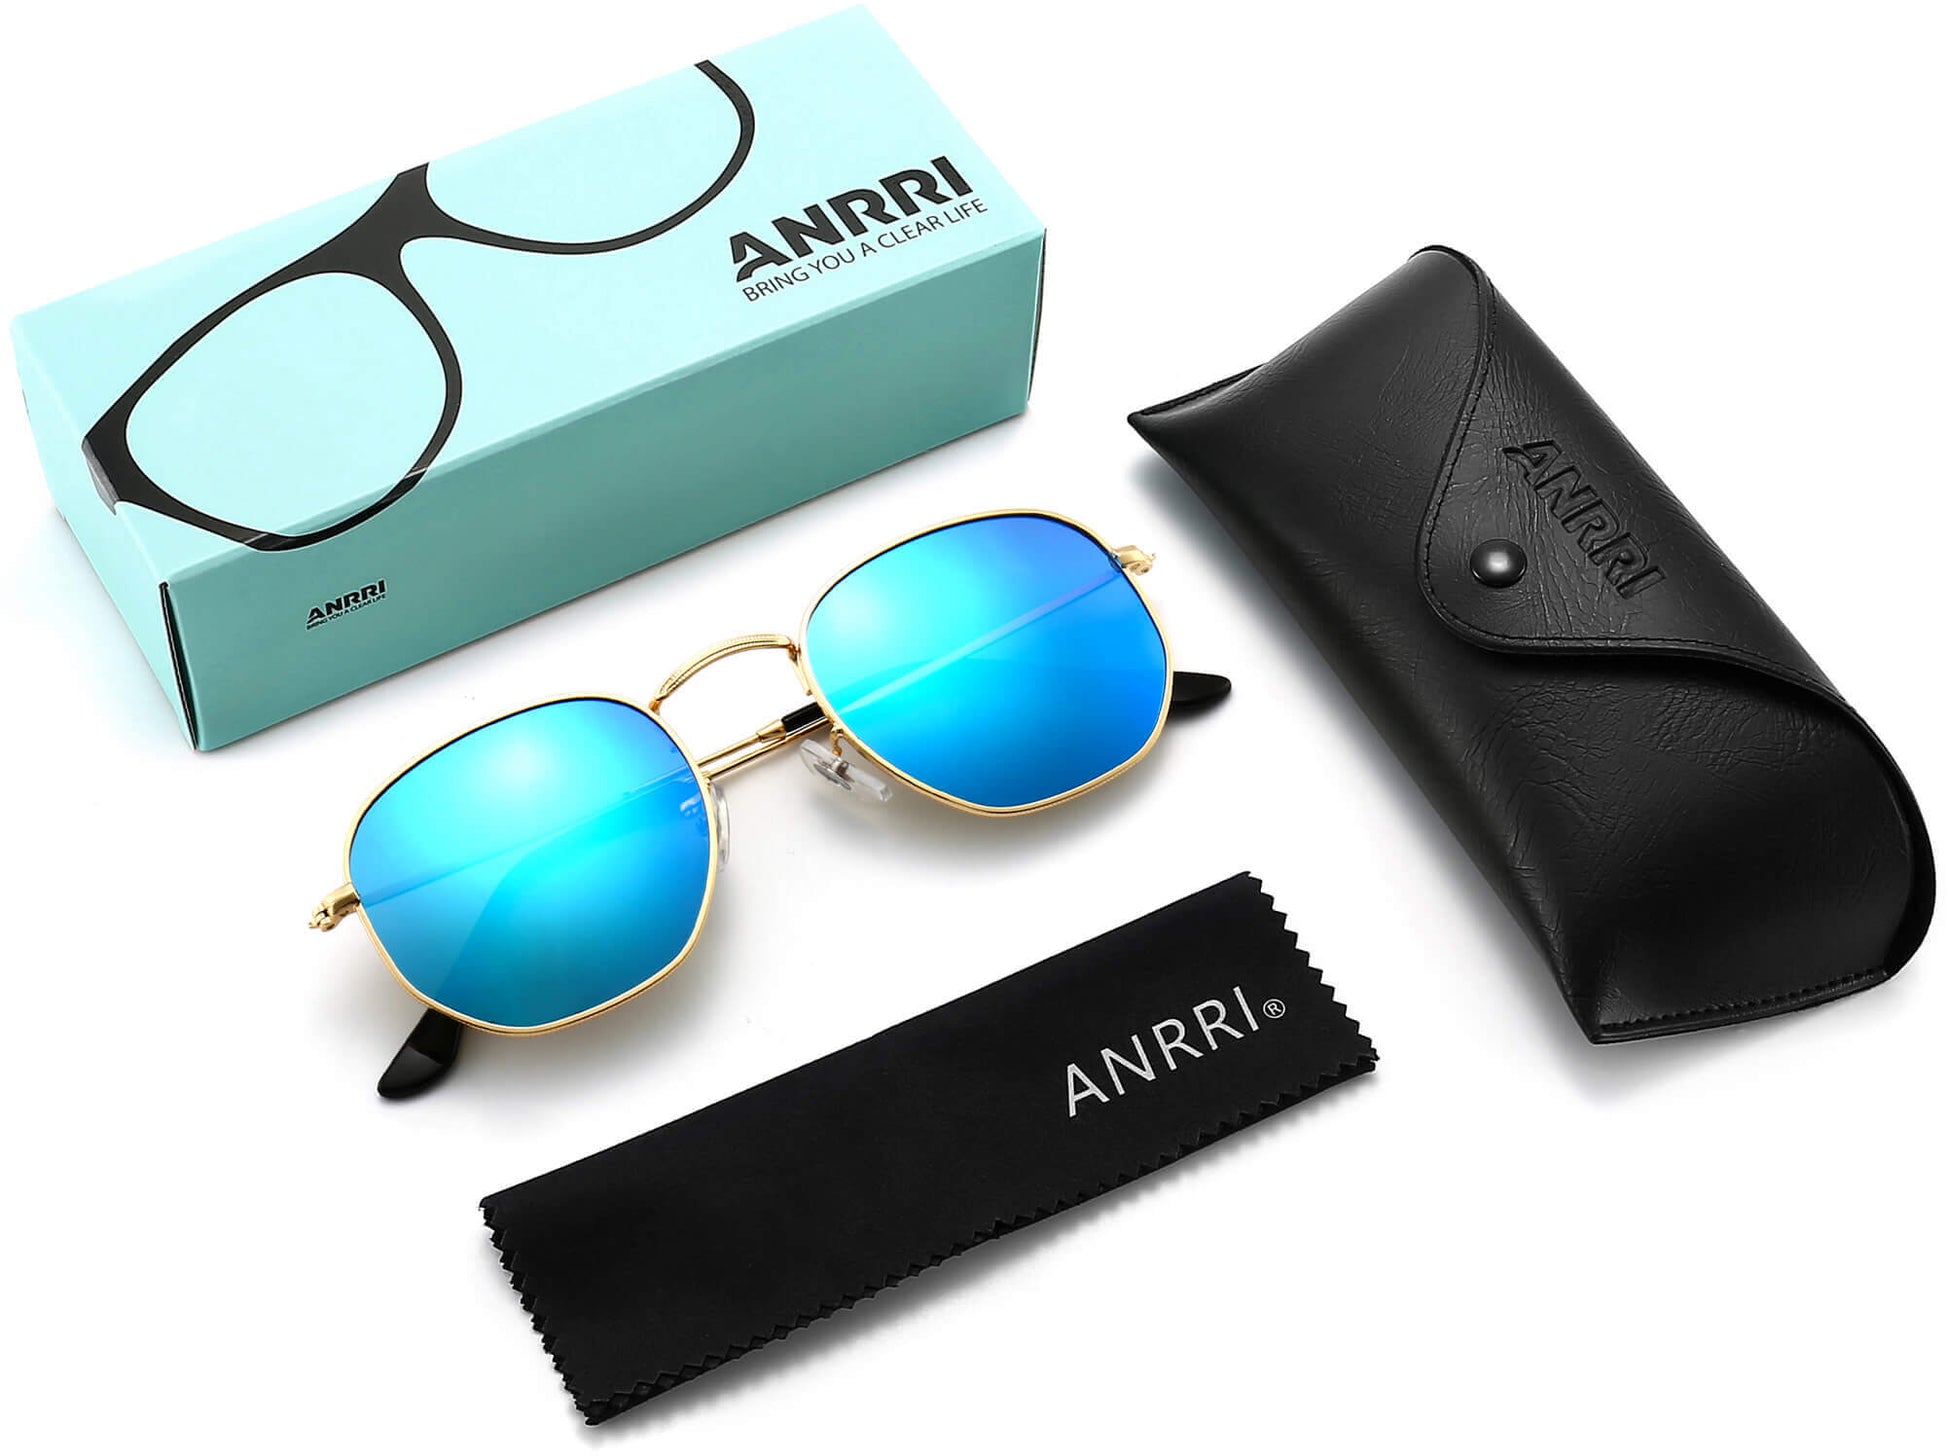 Lorenzo Gold Stainless steel Sunglasses with Accessories from ANRRI